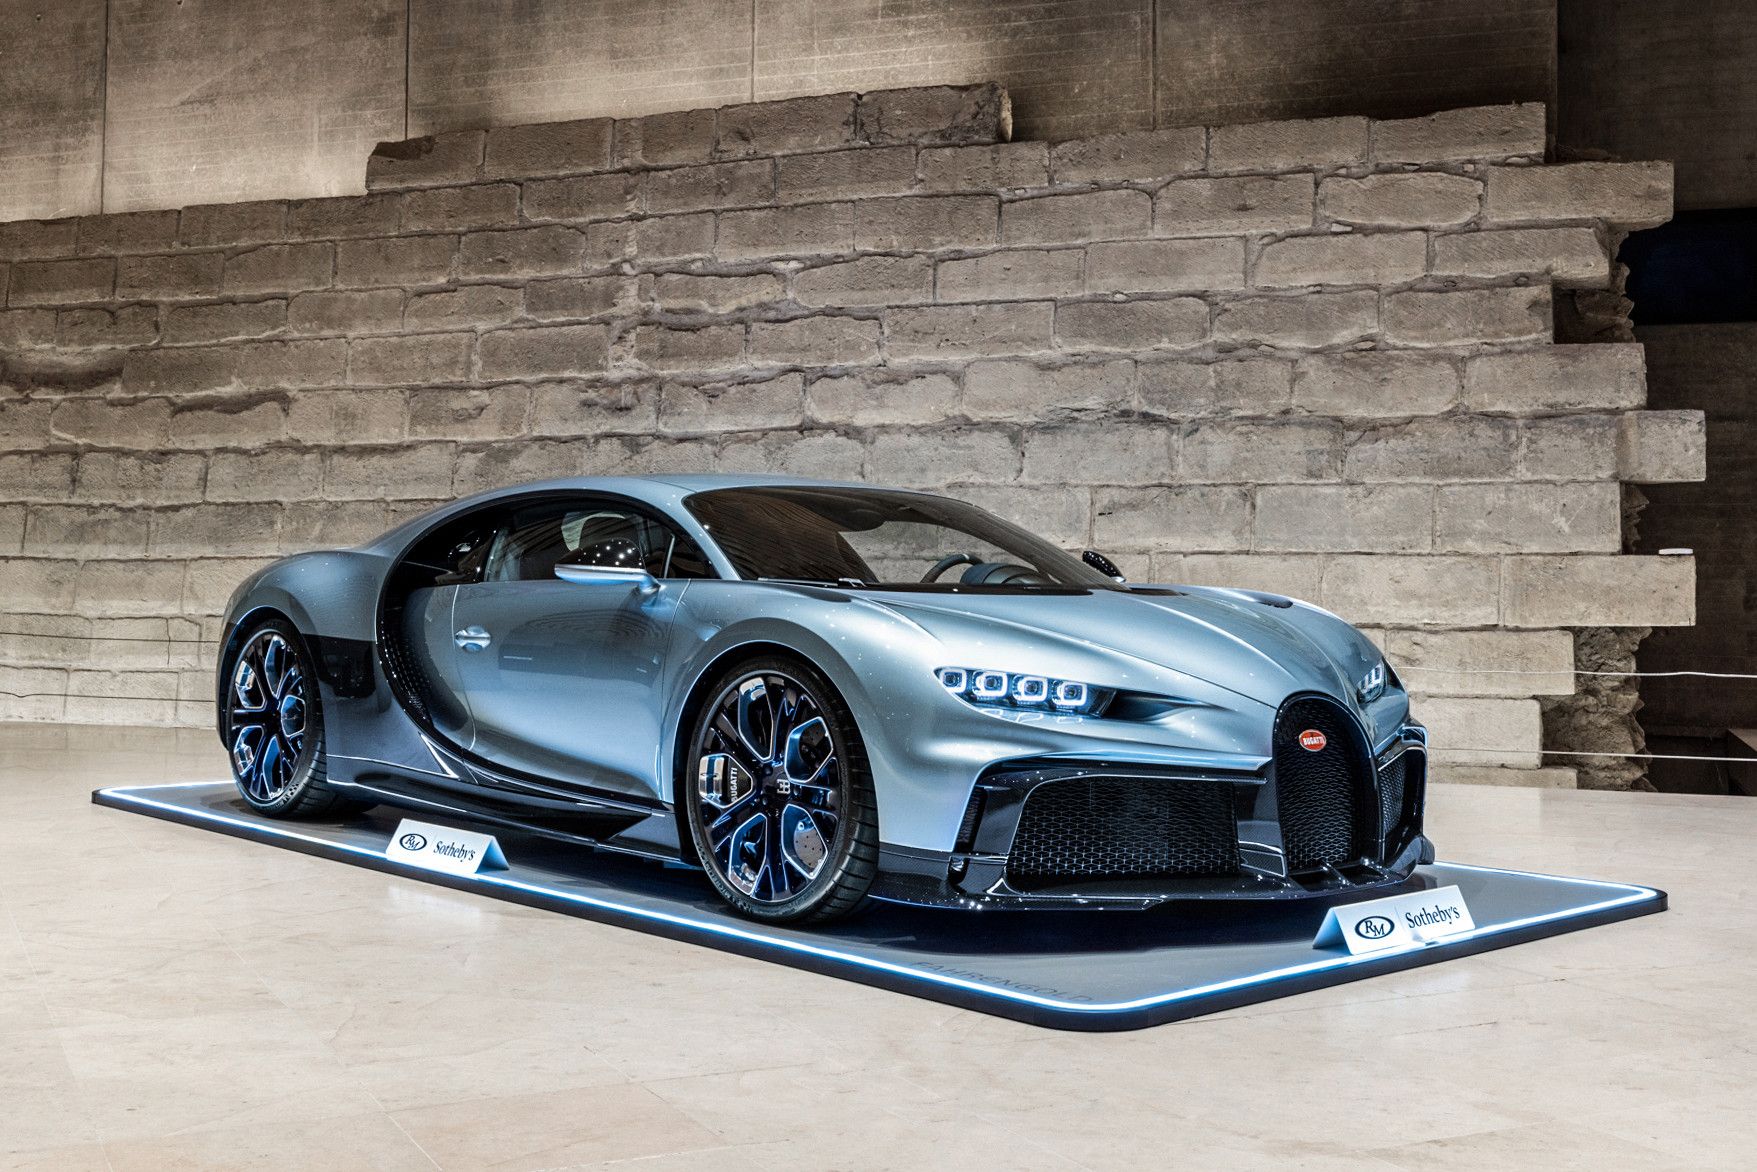 Chiron ProfilÃ©e Becomes Most Expensive New Car Sold At Auction